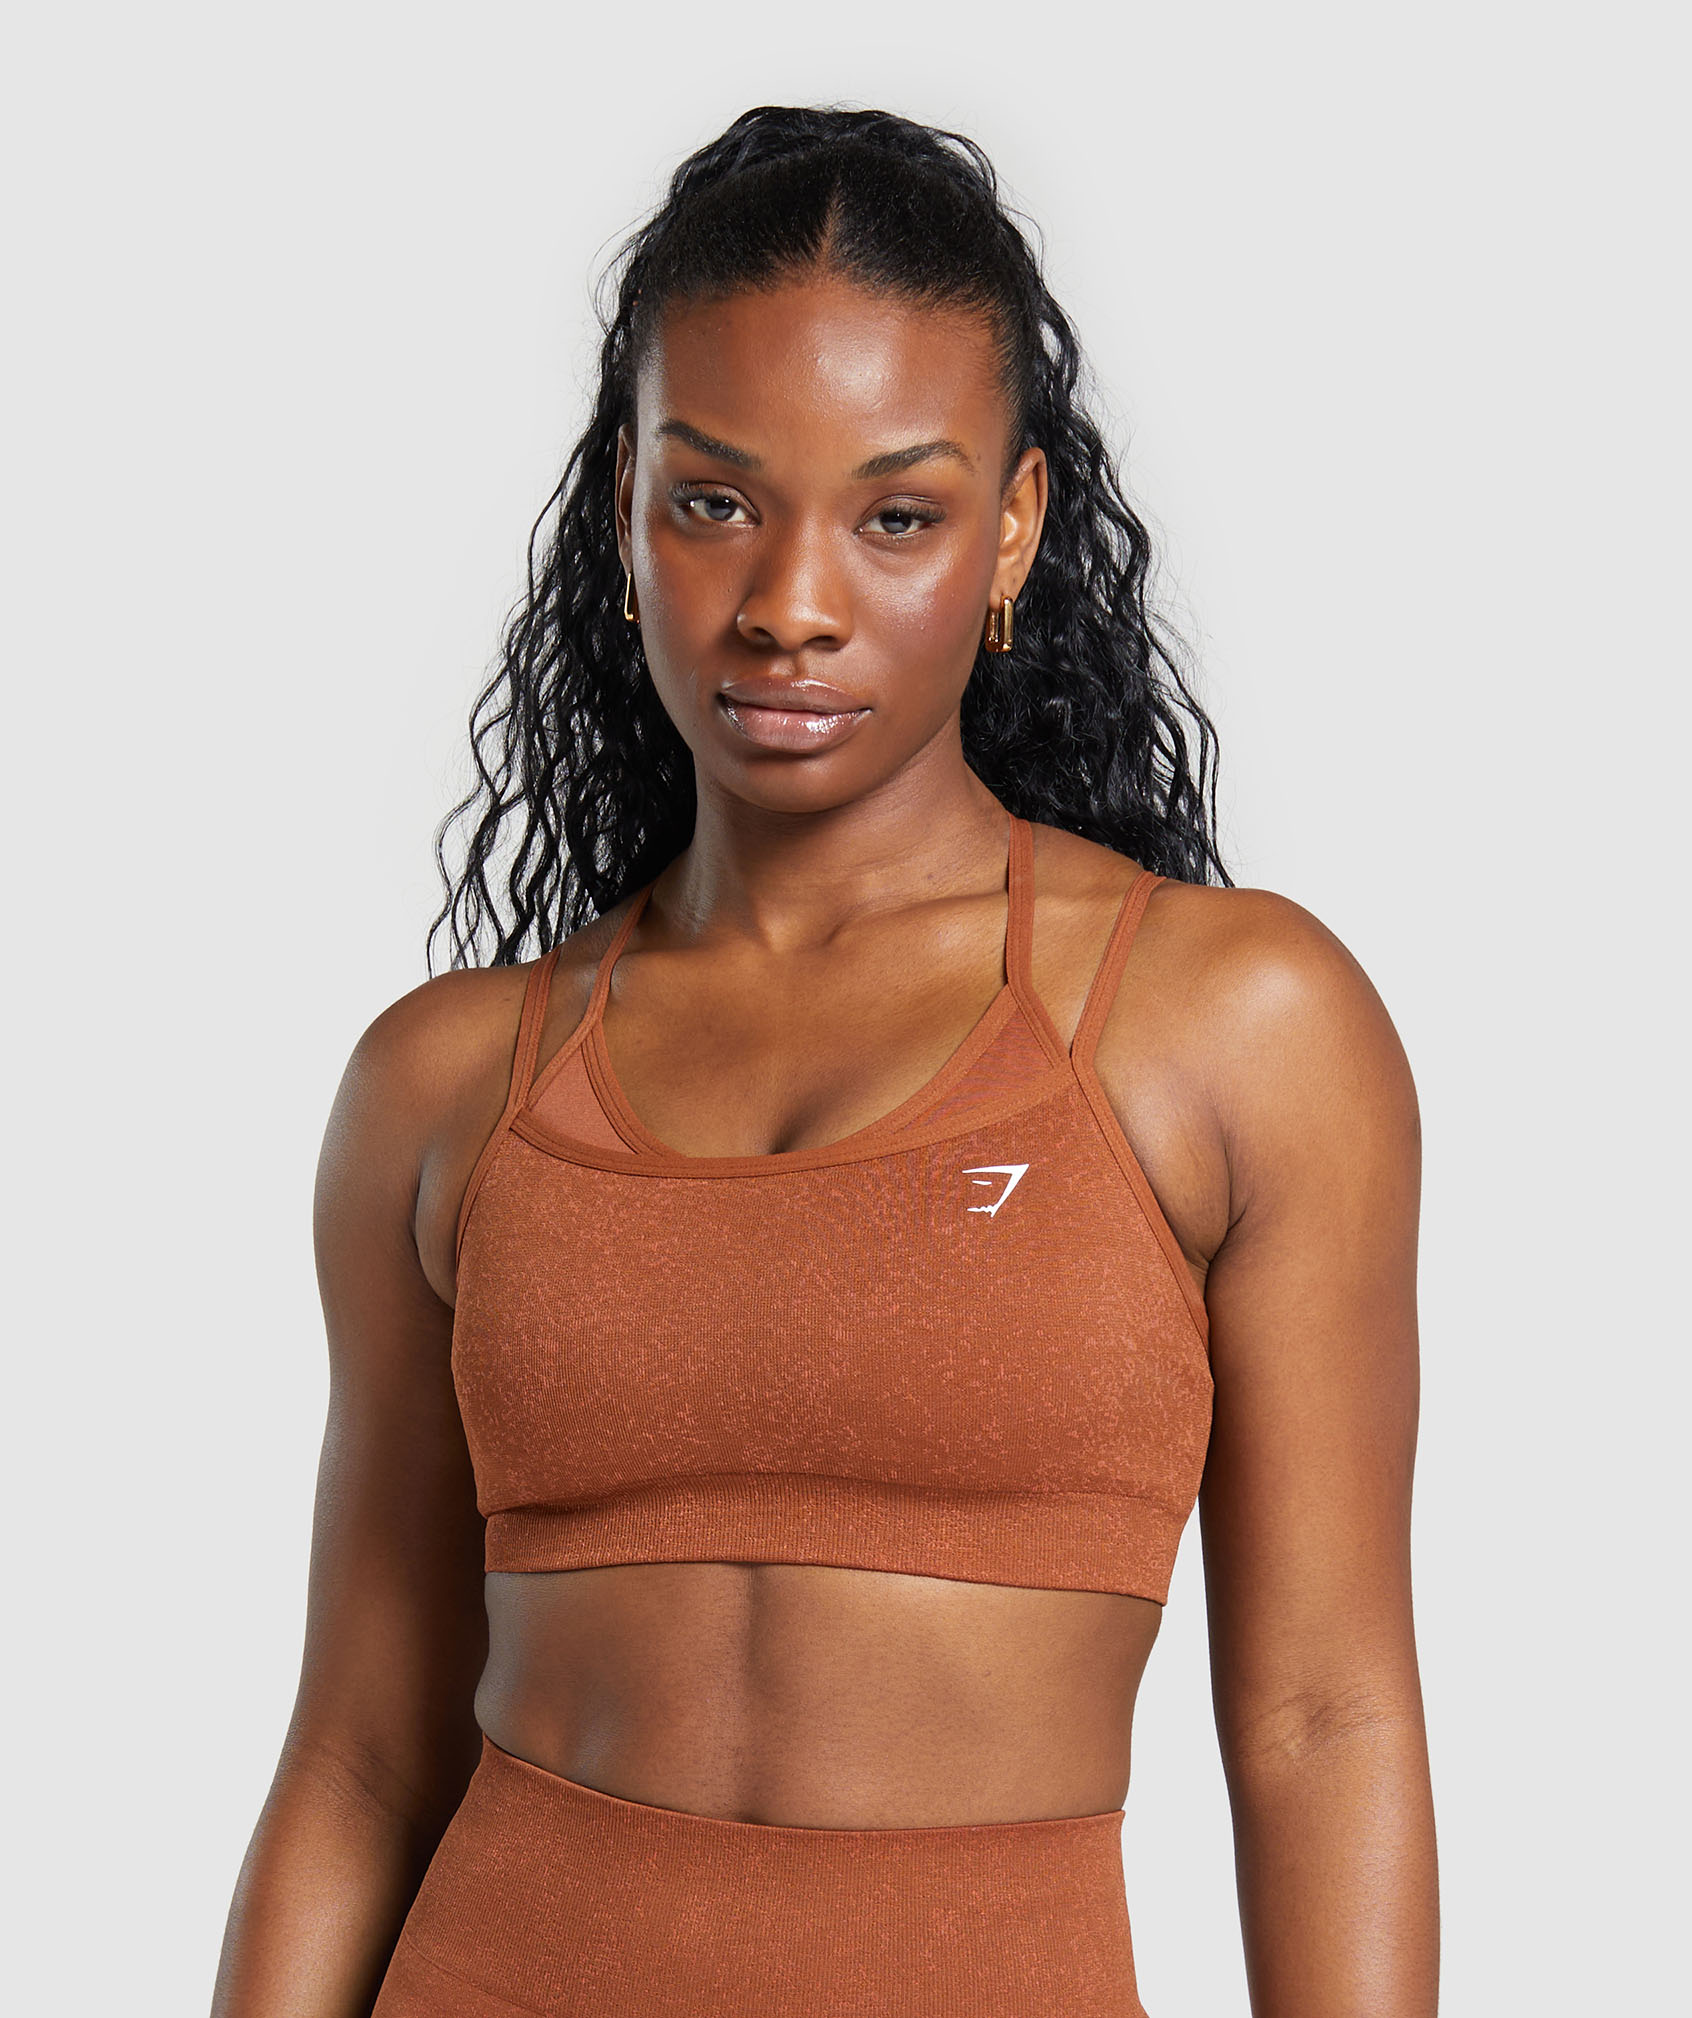 Why Are Sports Bras Important & How to Find the Right Sports Bra – Holabird  Sports